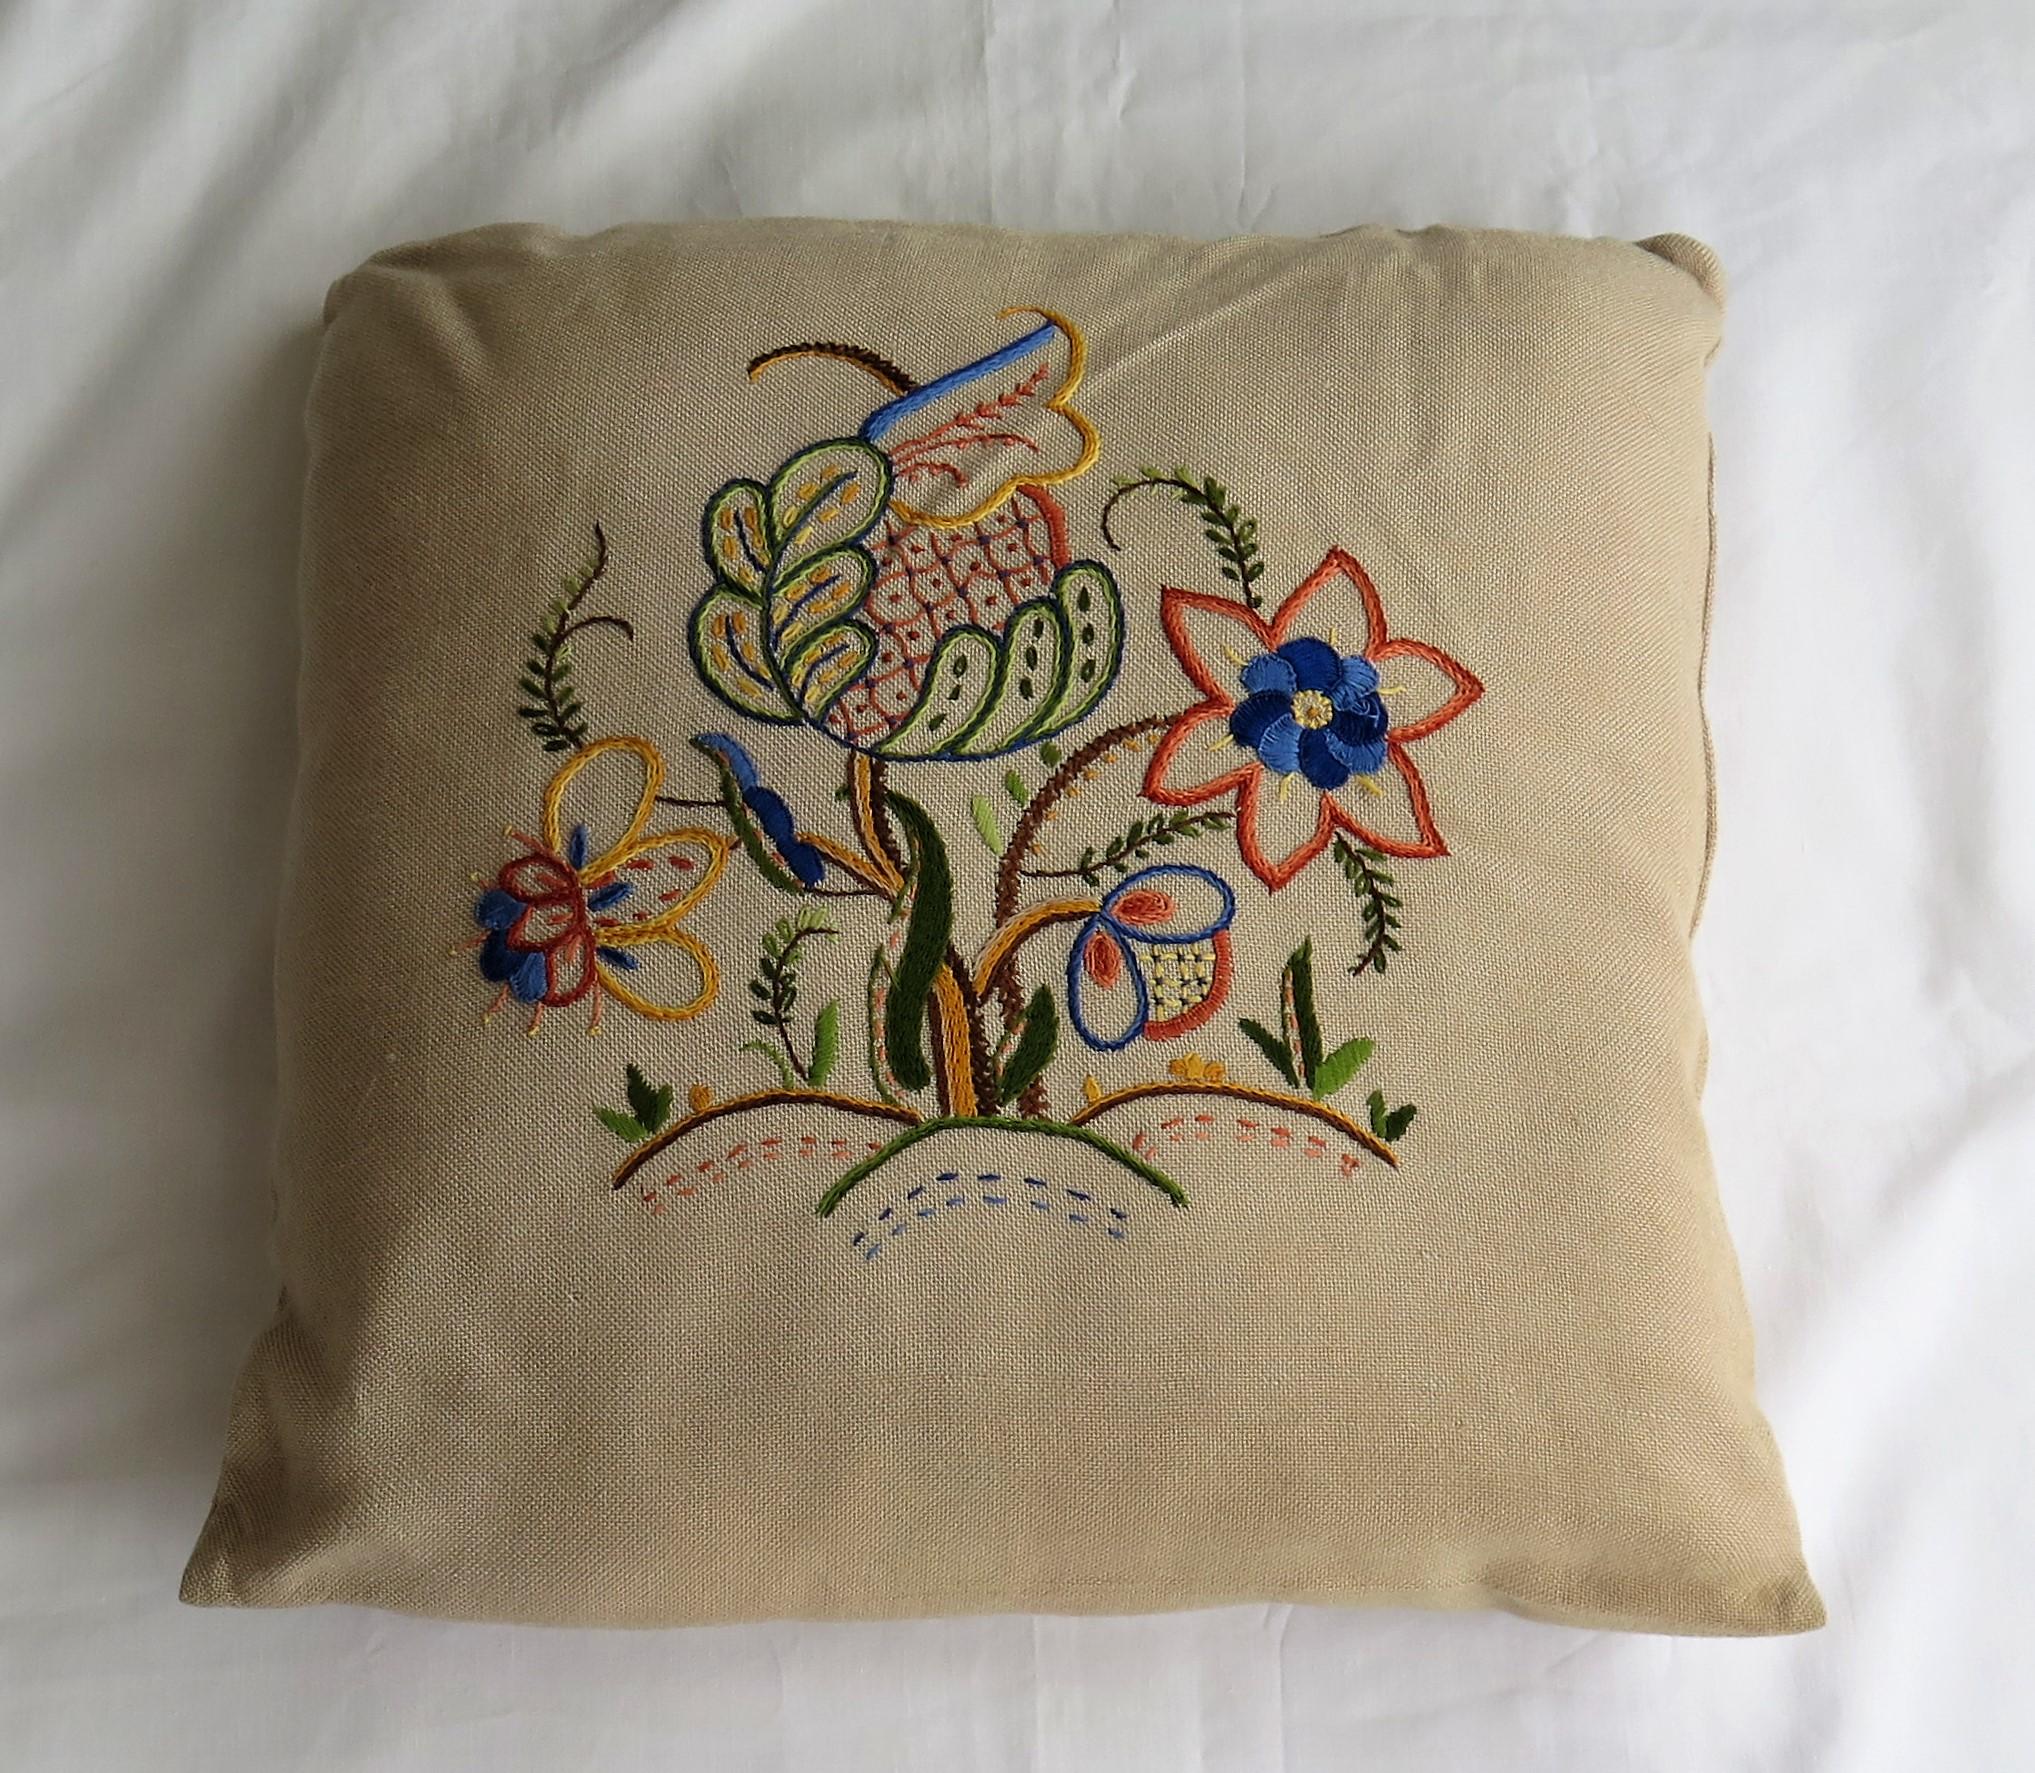 This is a very decorative cushion or pillow with hand embroidered stylised flowers, which we date to the mid-20th century, circa 1940.

The pillow is about 15 inches square.

The decoration features beautifully hand embroidered stylised flowers